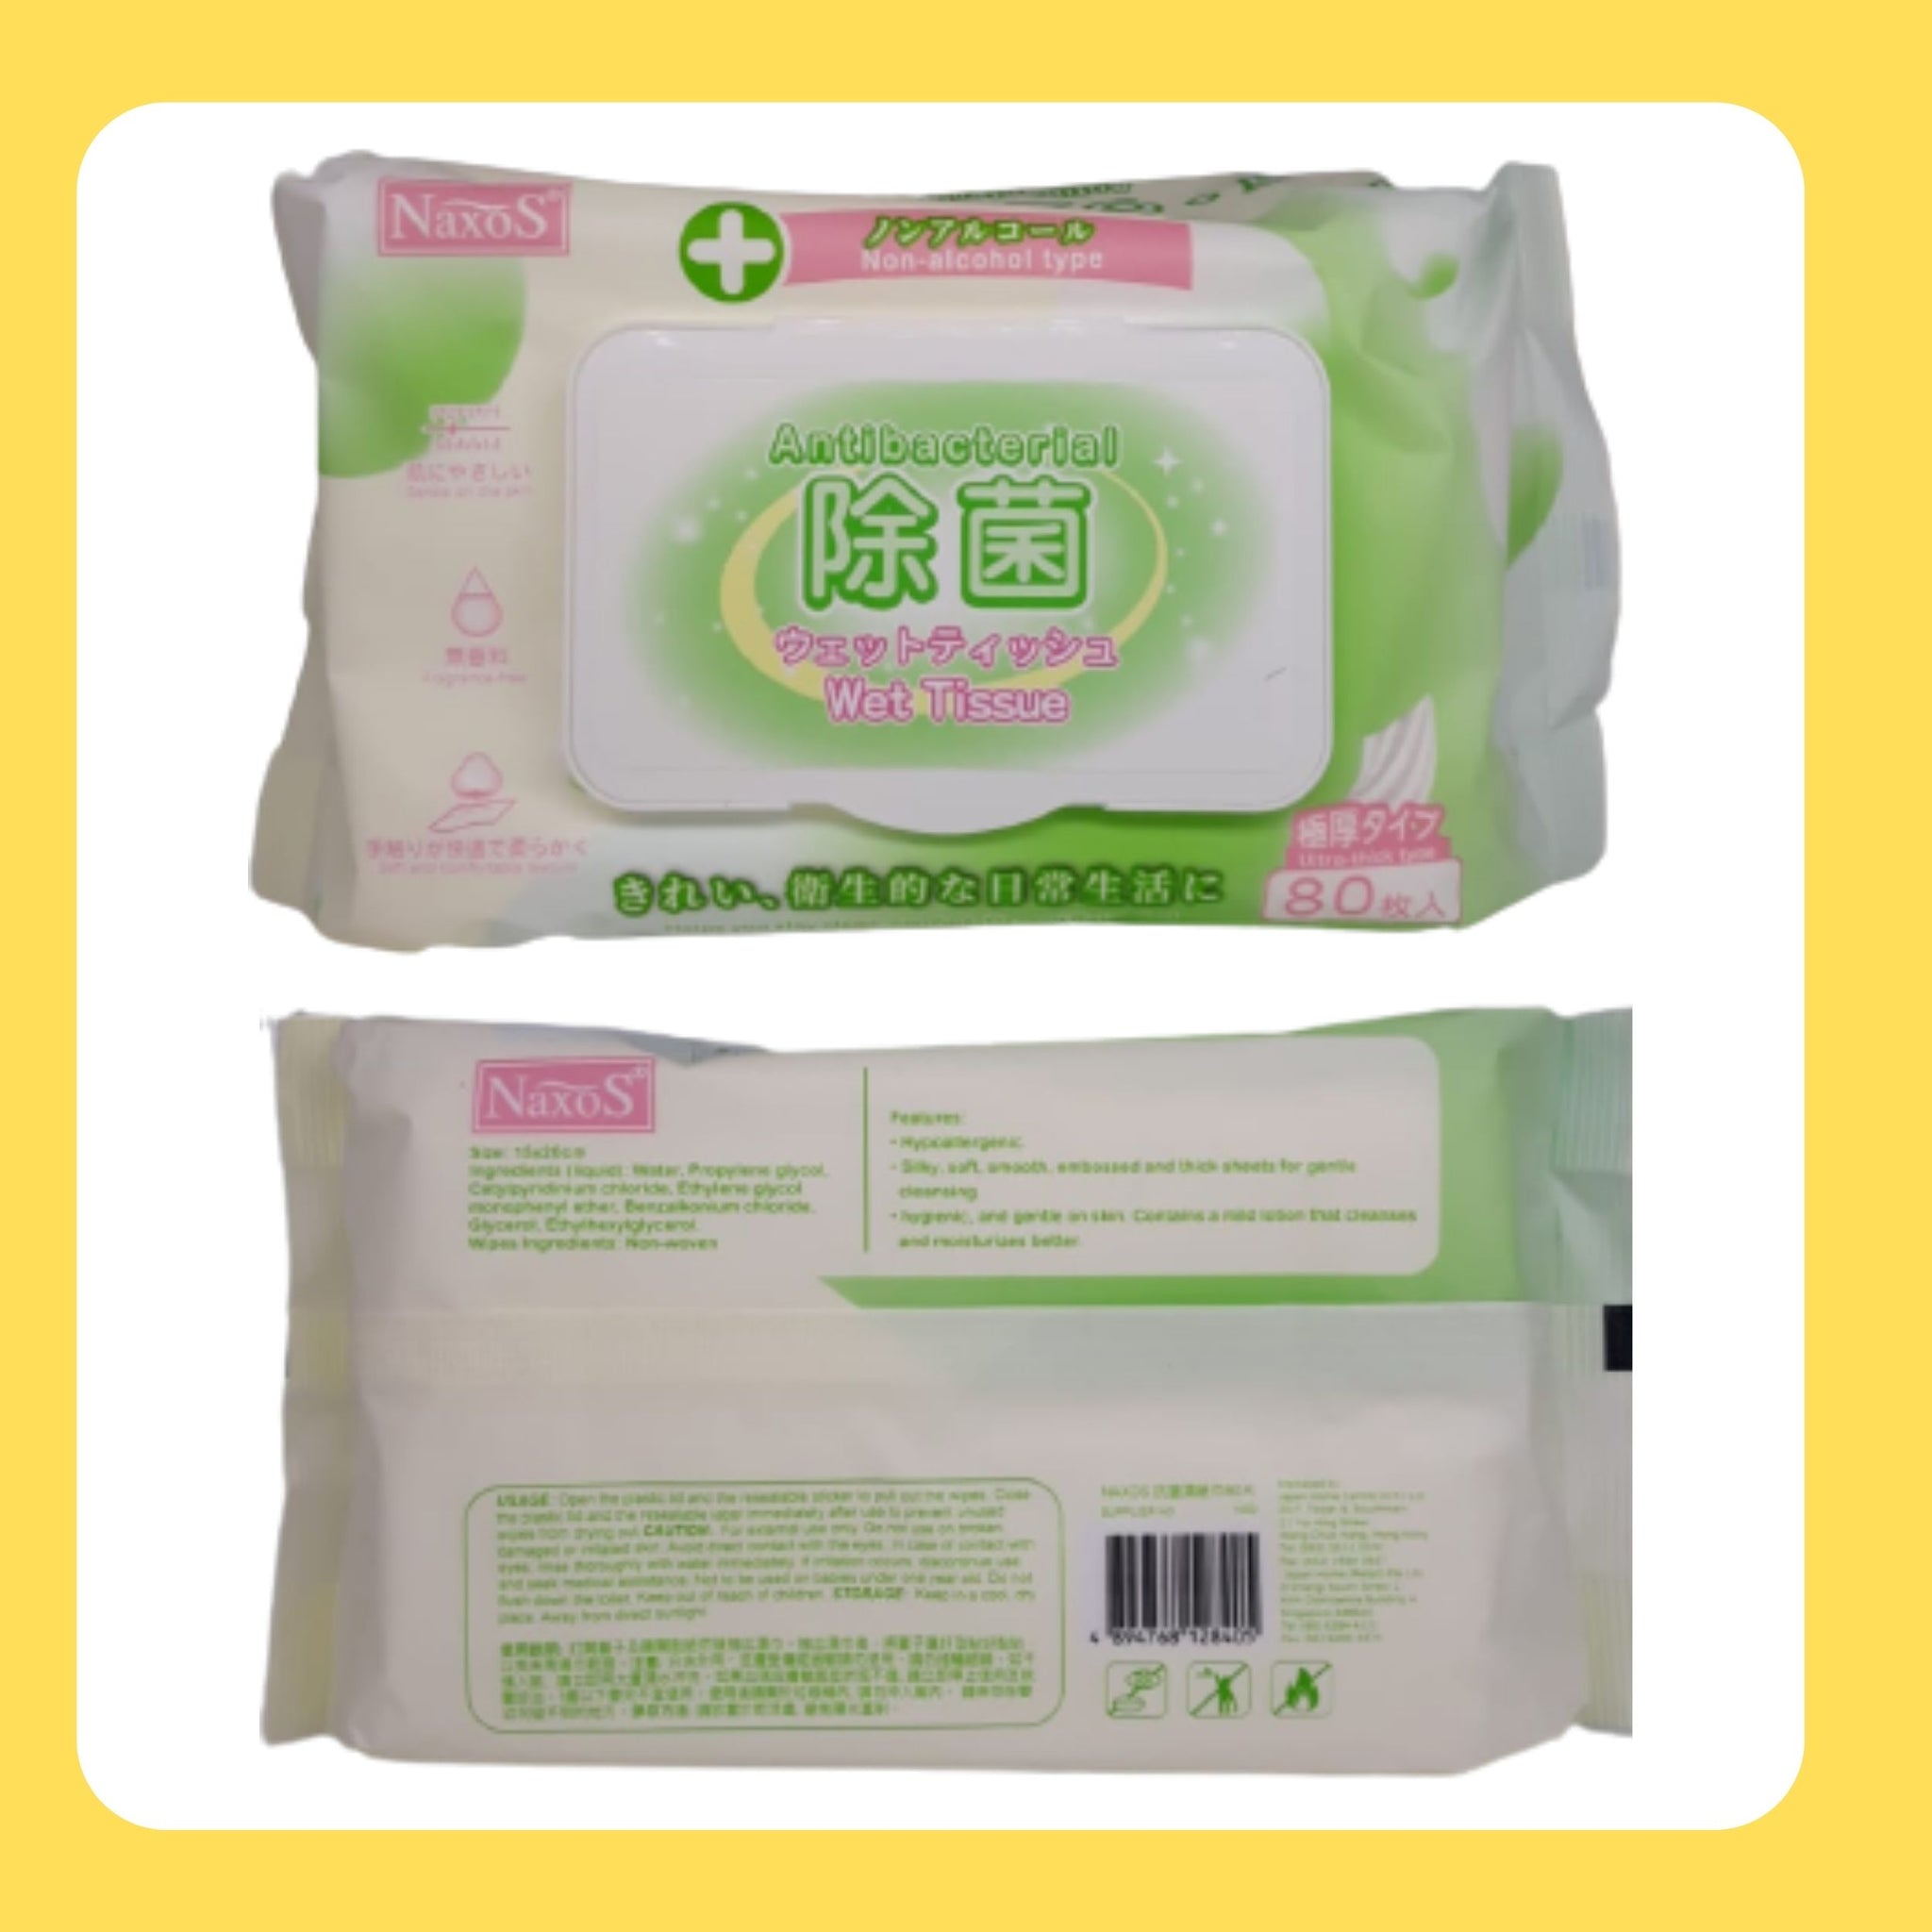 NAXOS Antibacterial Wet Wipes 20 sheets front and back view